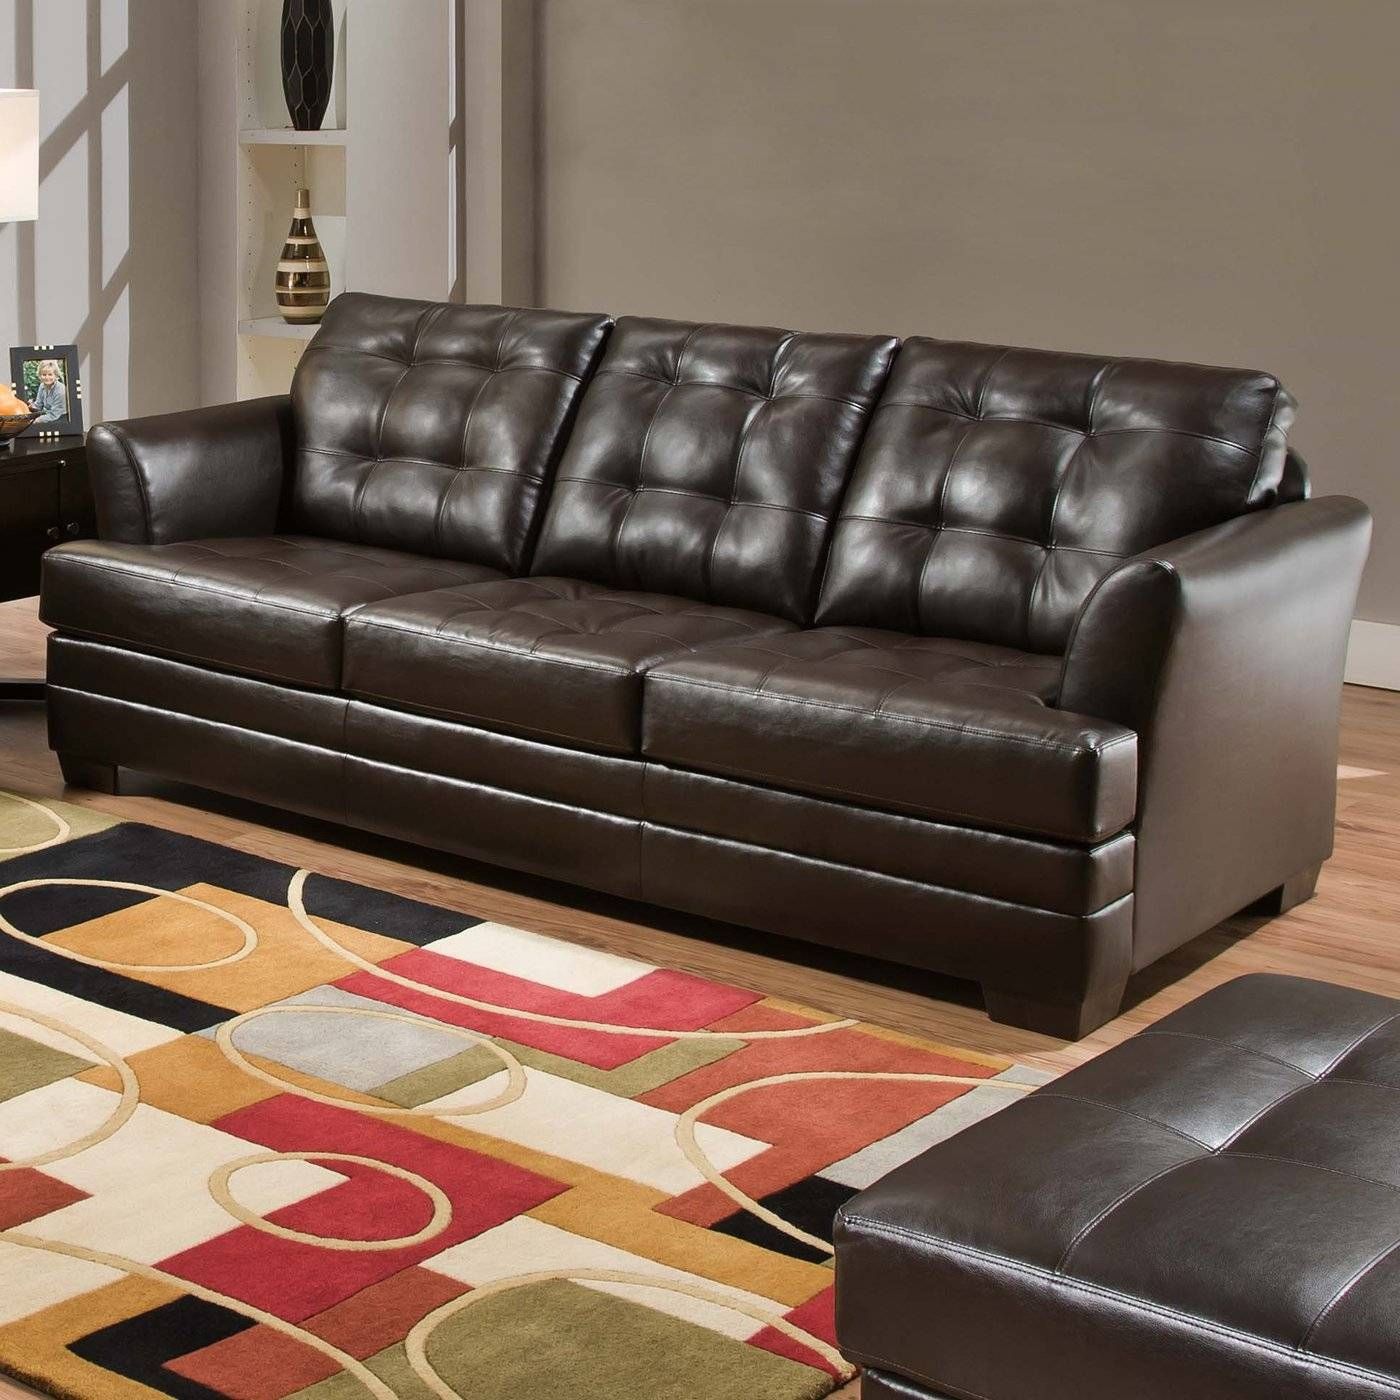 Sofas: Comfortable Simmons Sleeper Sofa For Cozy Sofas Design Throughout Simmons Sofa Beds (View 11 of 15)